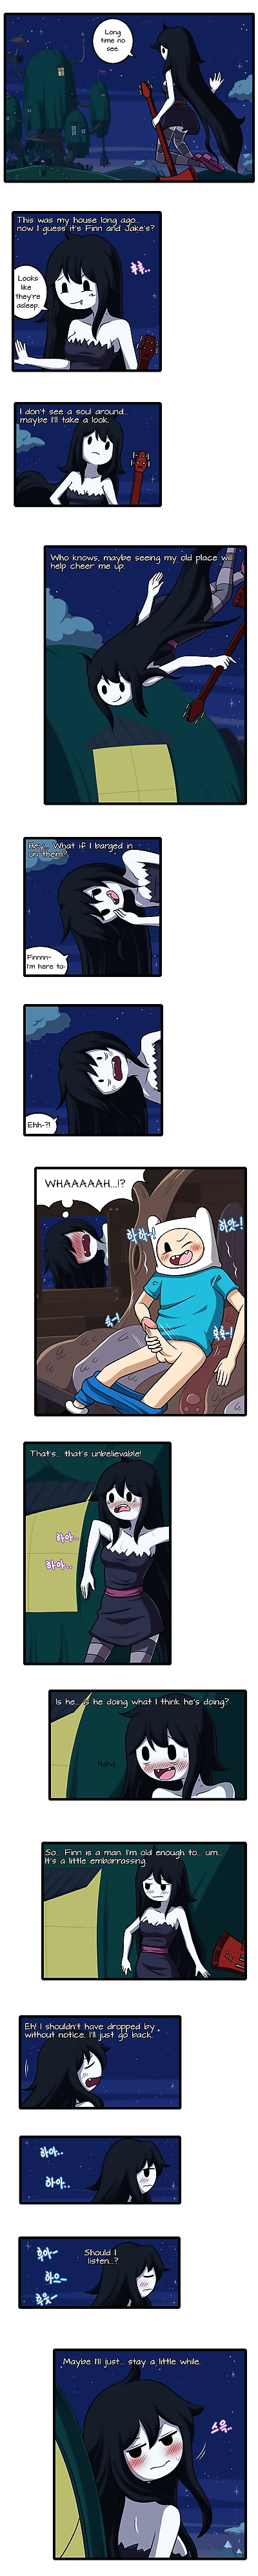 WB Adult Time 4 Adventure Time English